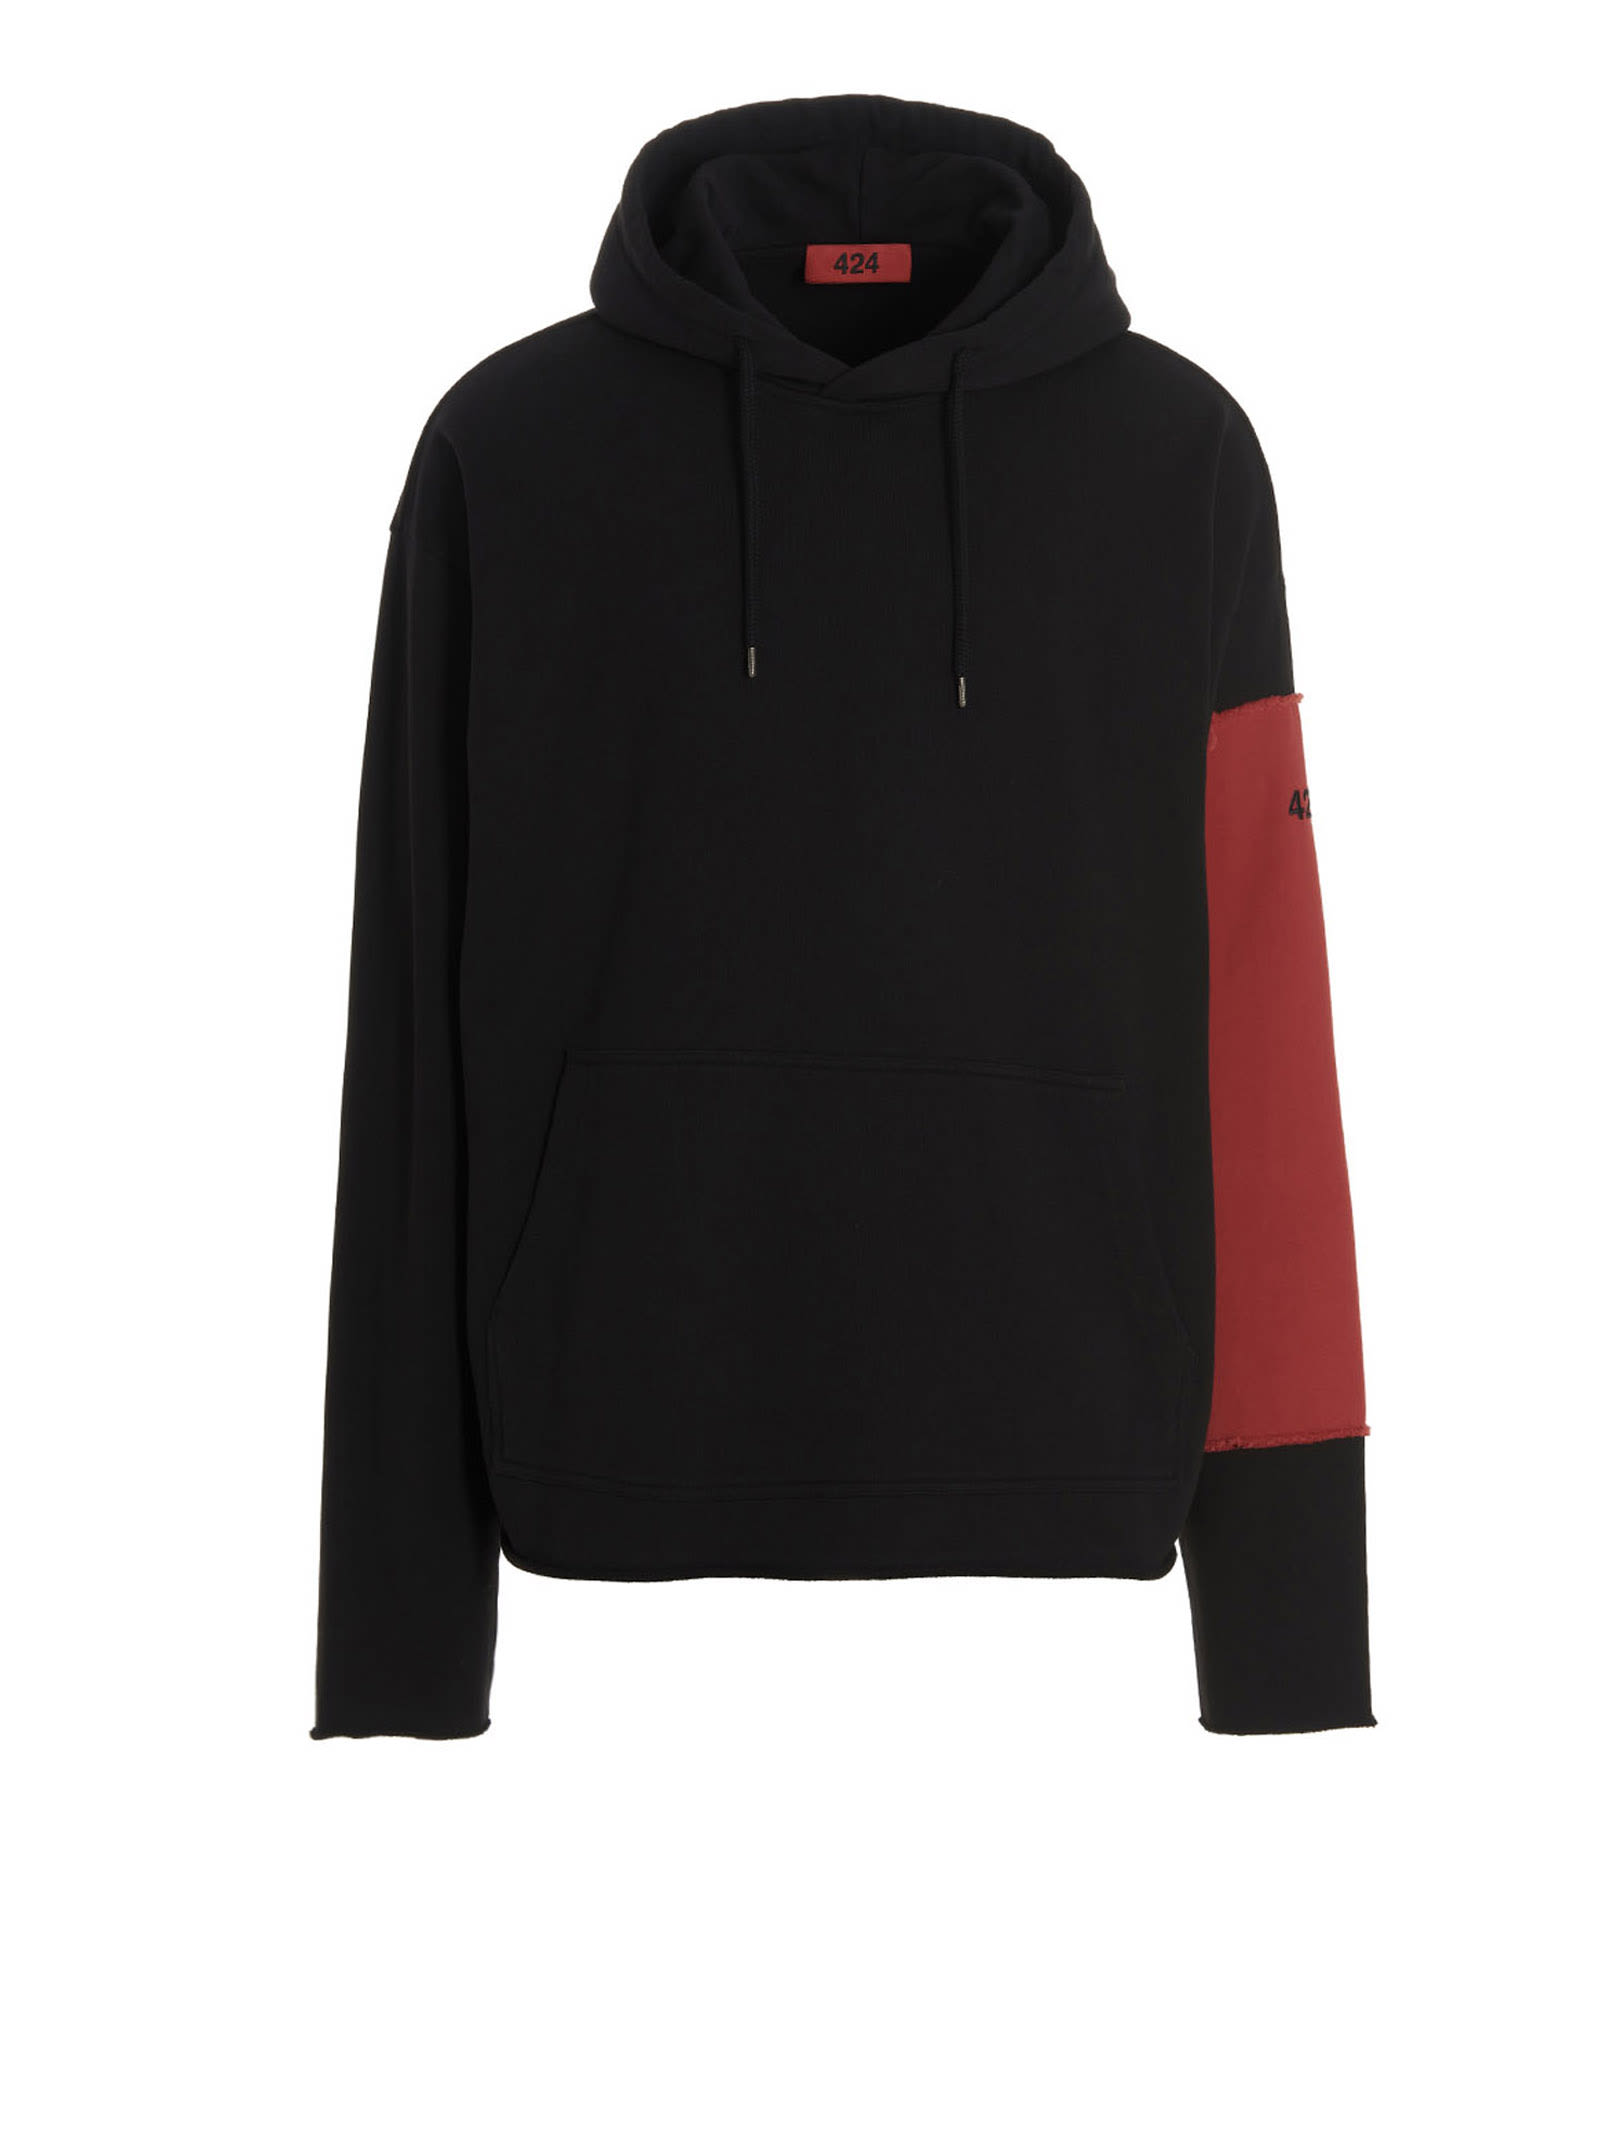 FourTwoFour on Fairfax Hoodie Featuring Contrasting Sleeves